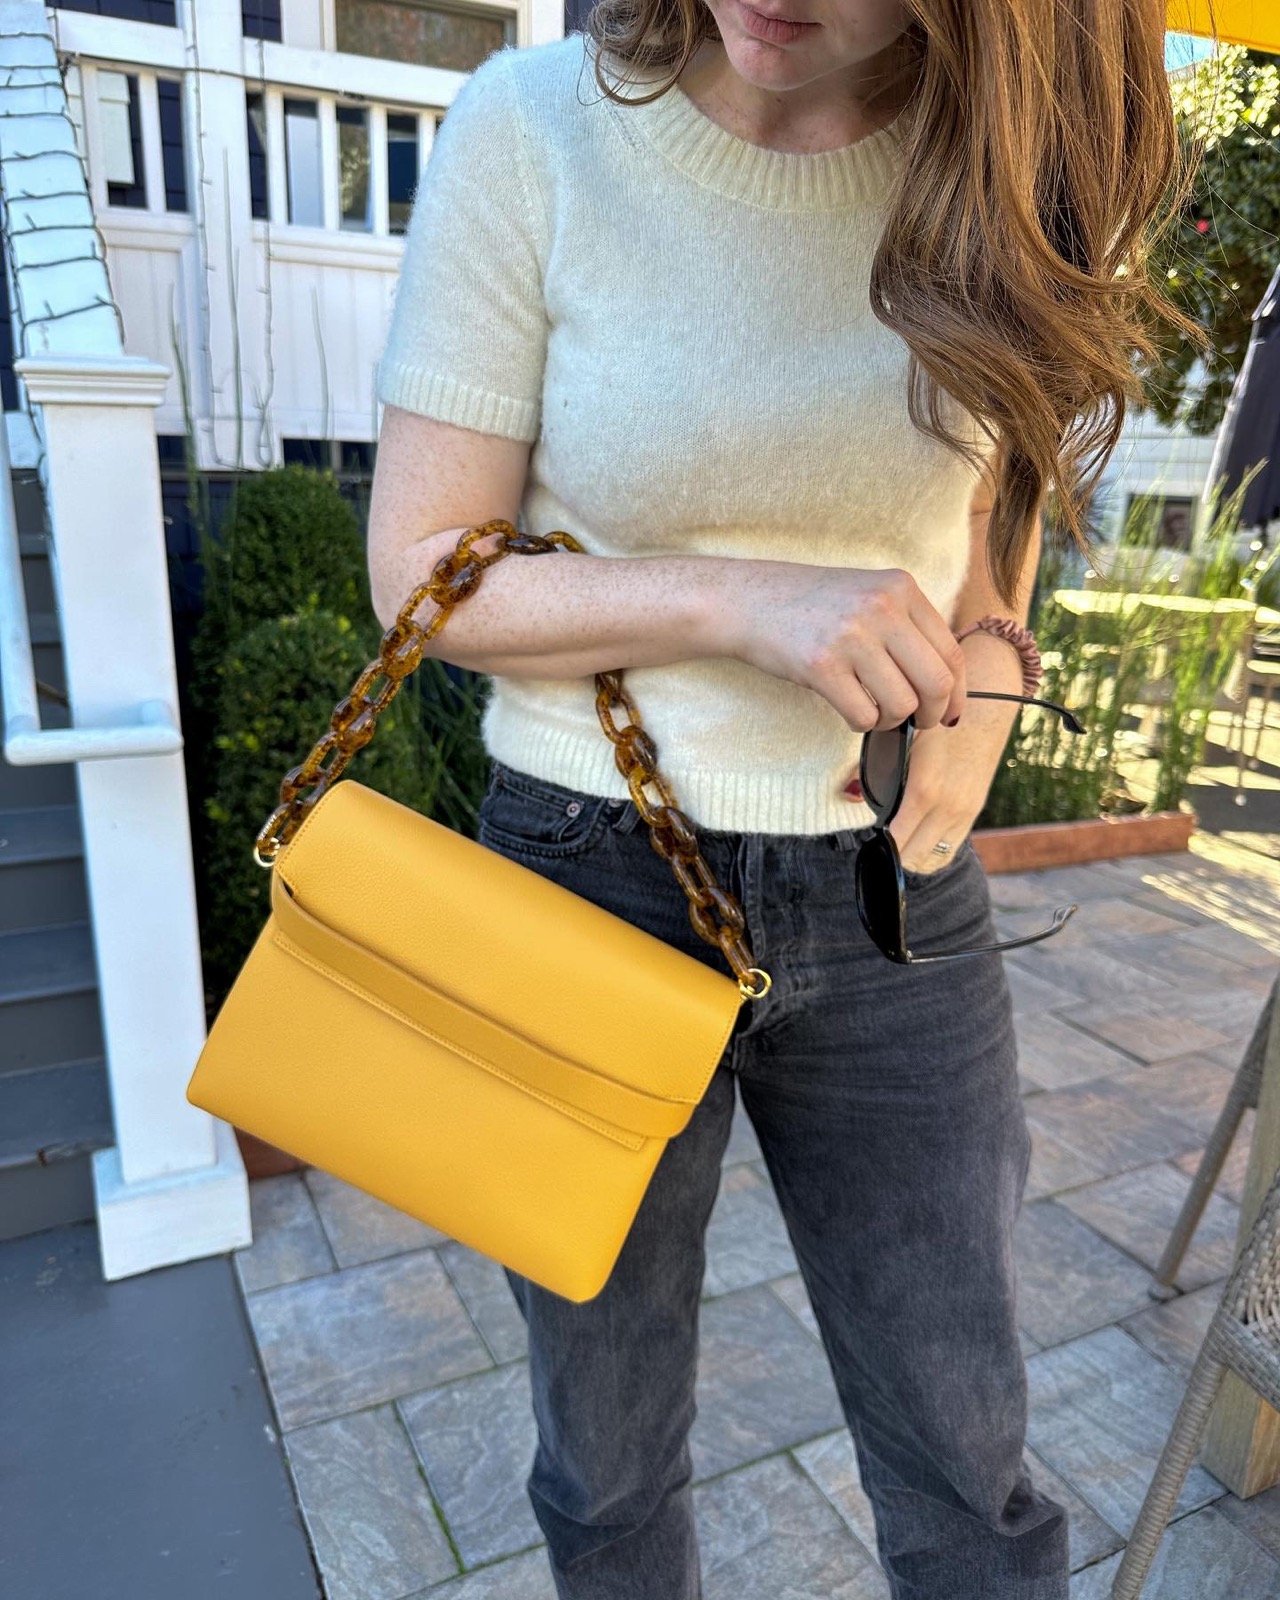 Popular Senreve Handbags Are on Sale for Up to 60% Off